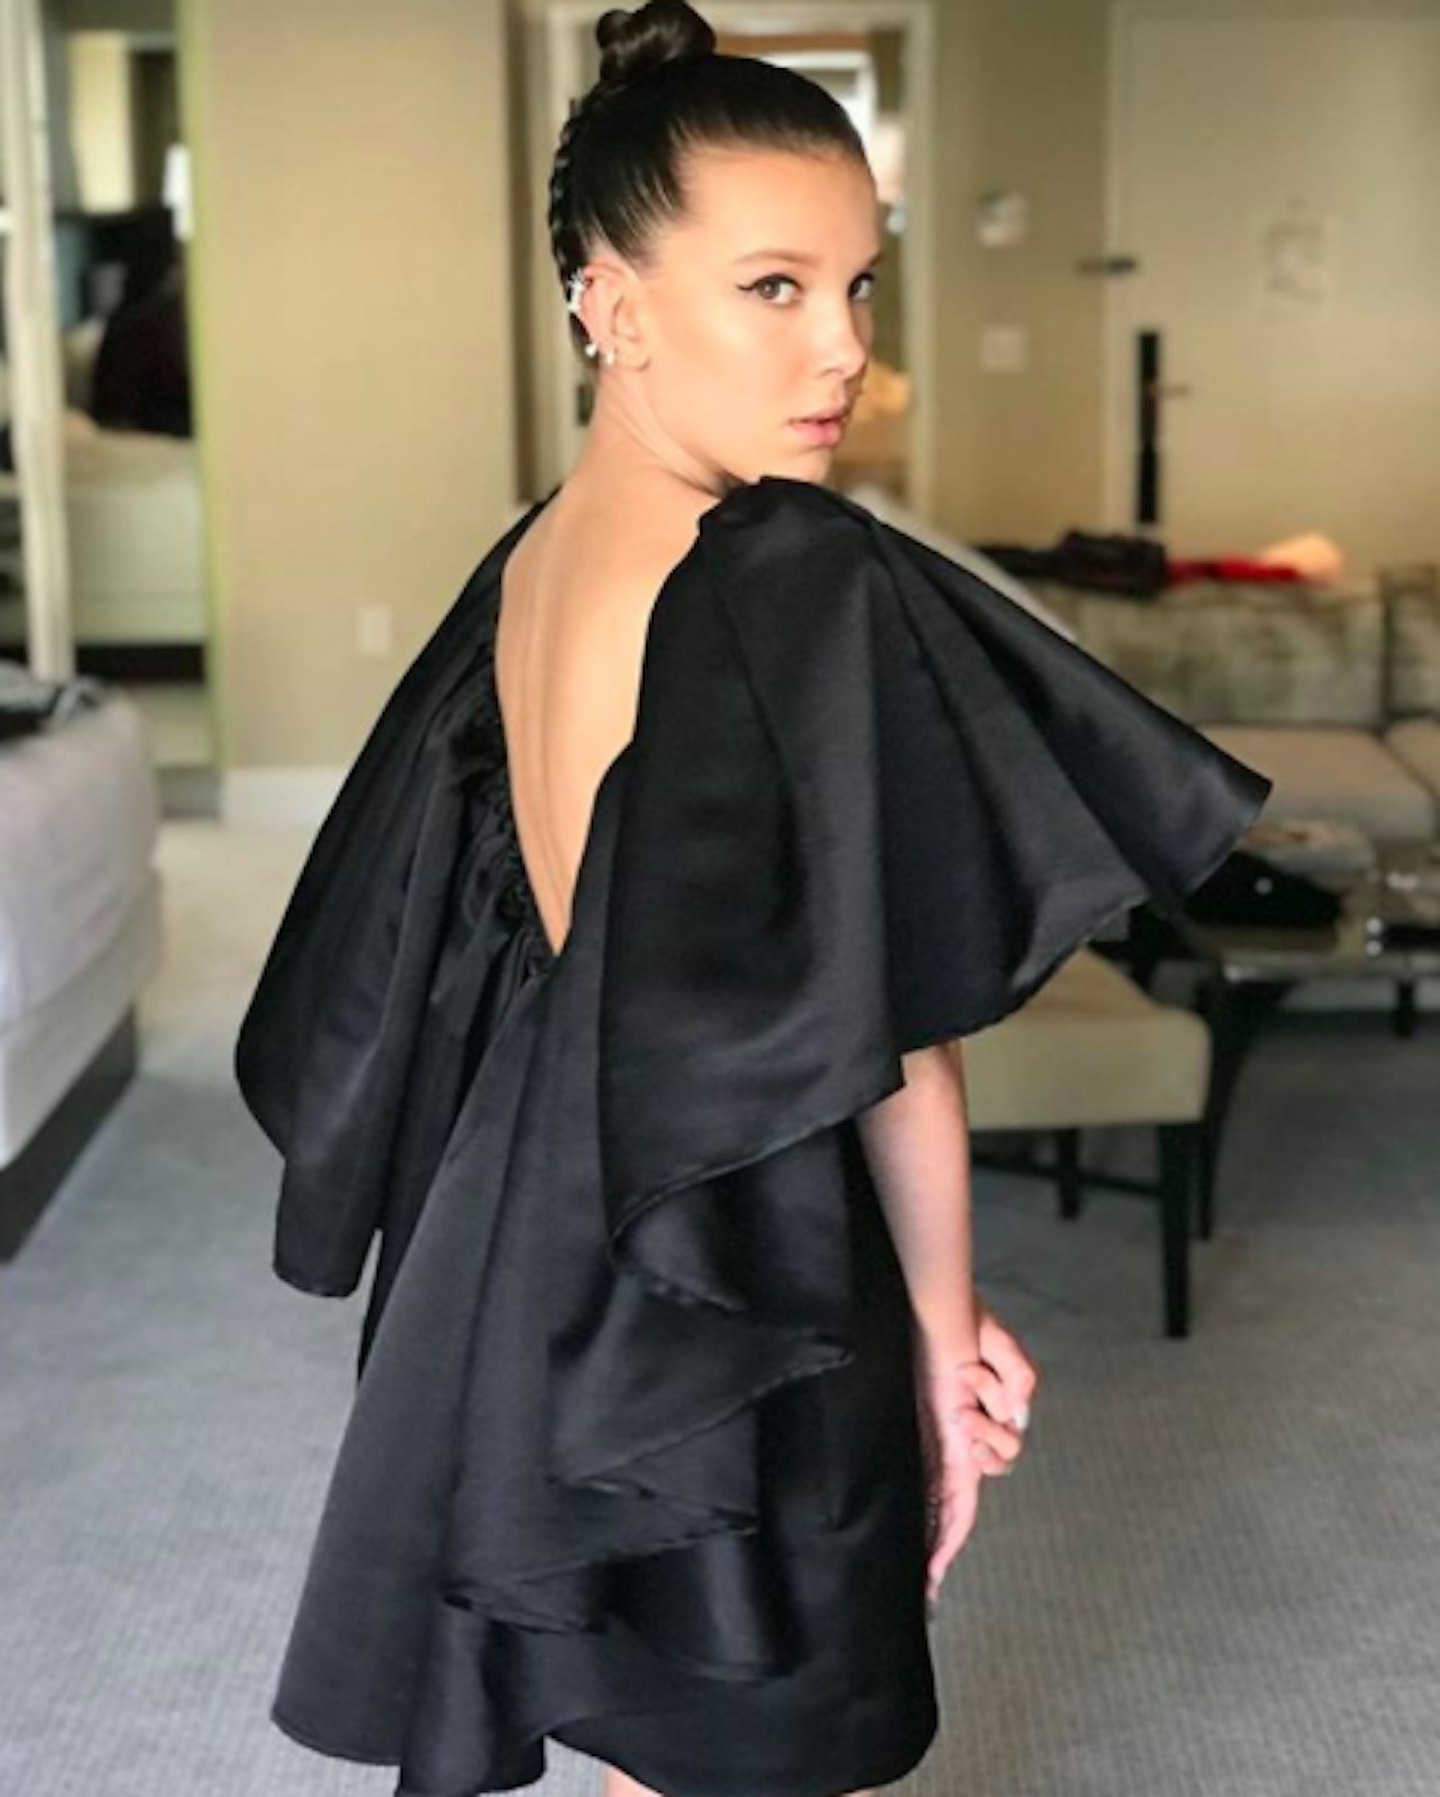 millie bobby brown fashion style